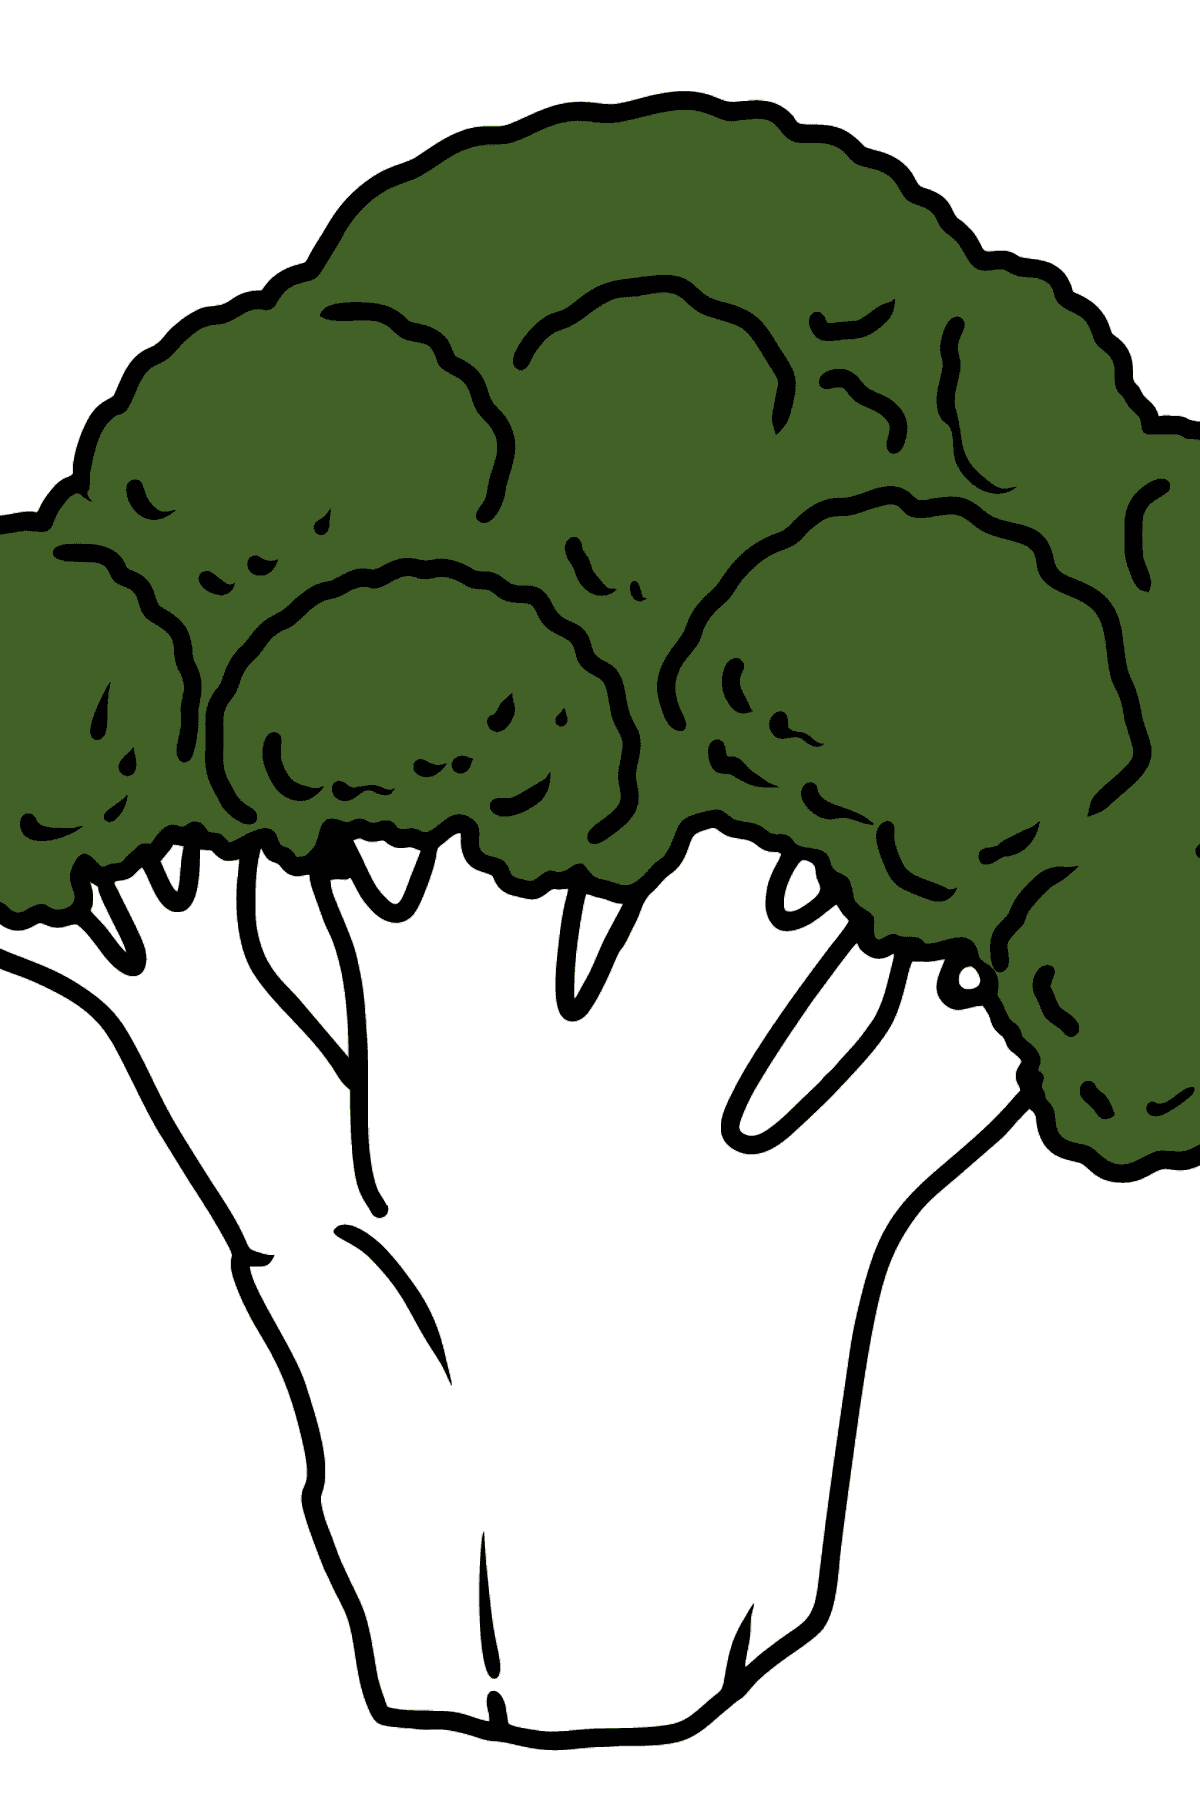 Broccoli coloring page - Coloring Pages for Kids